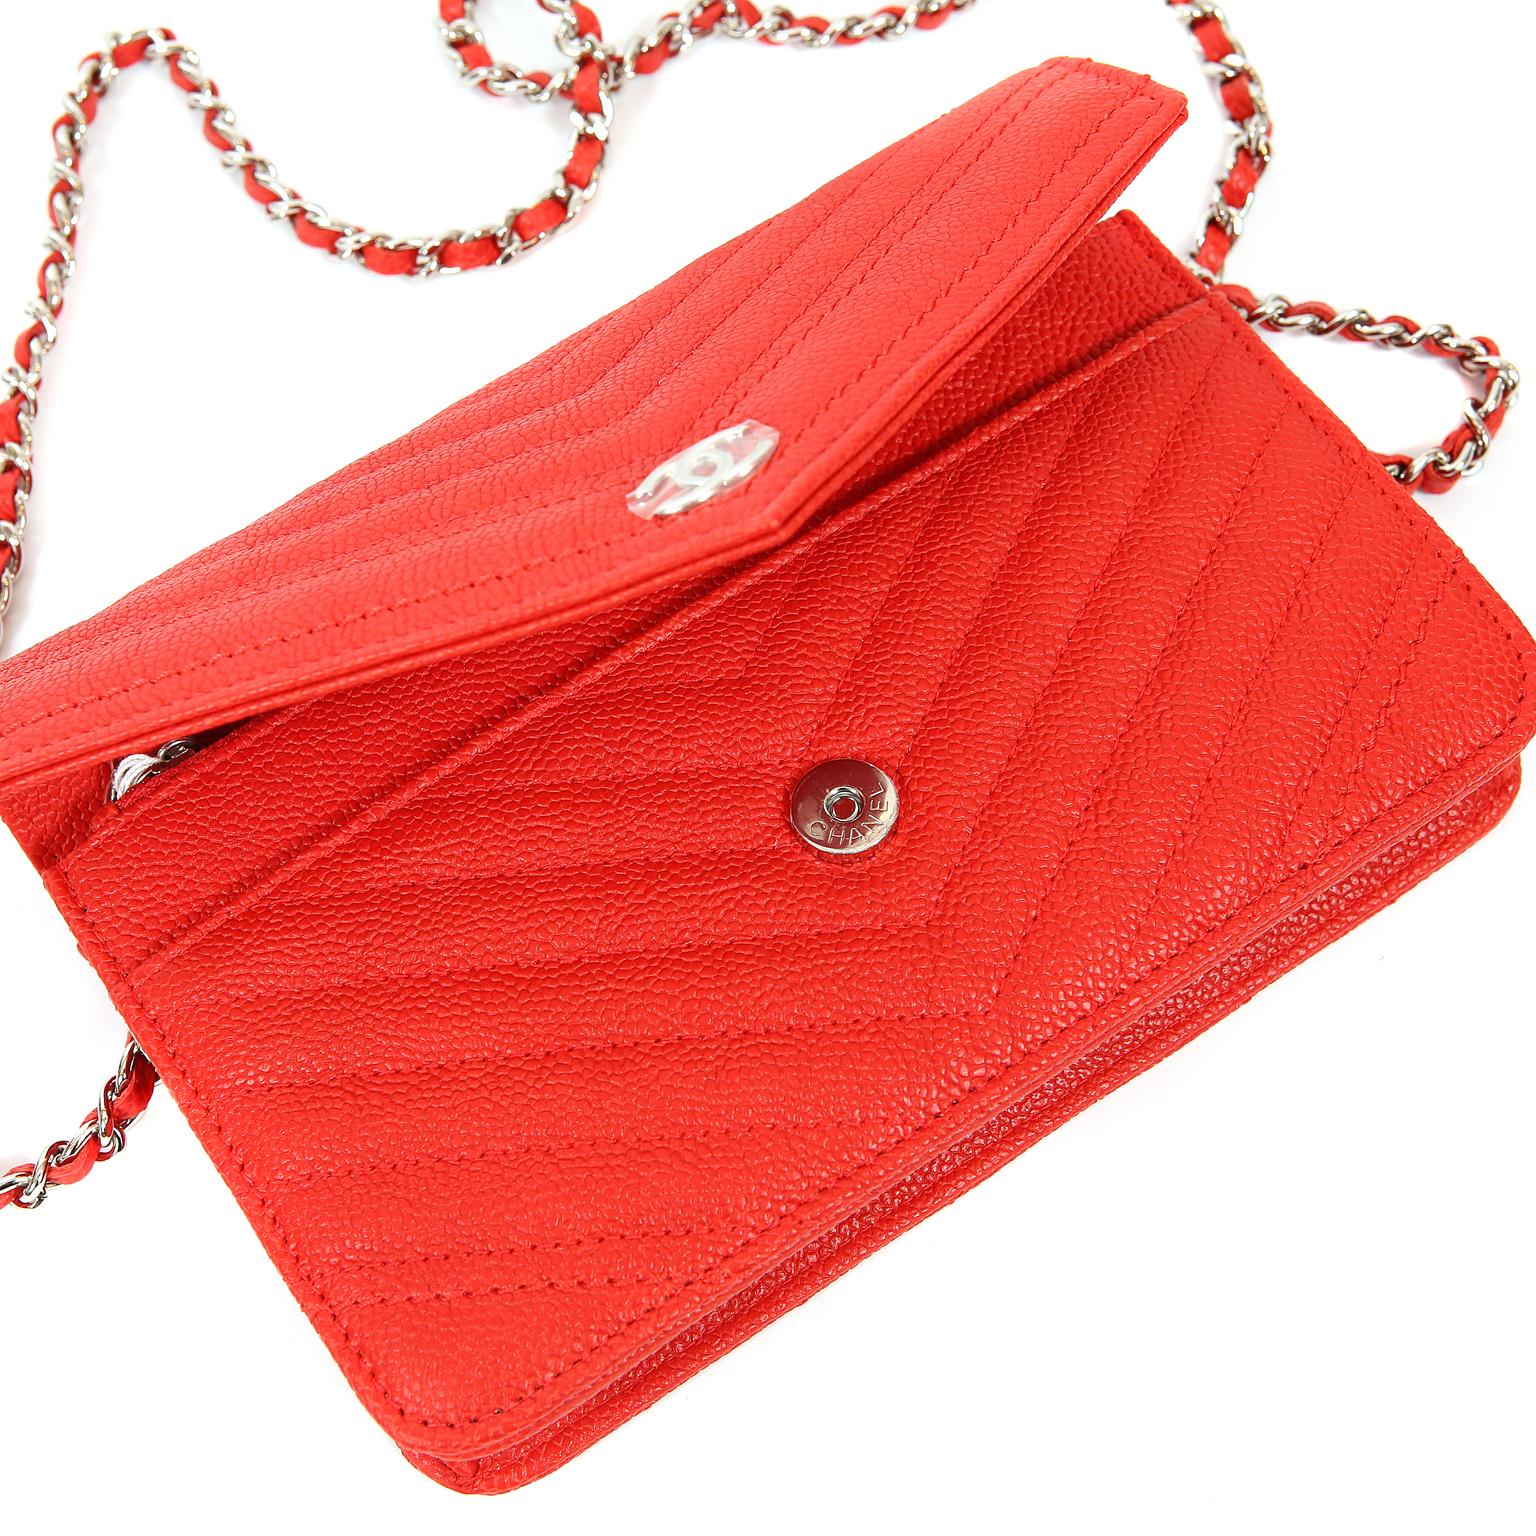 Chanel Red Caviar WOC Wallet on a Chain 2